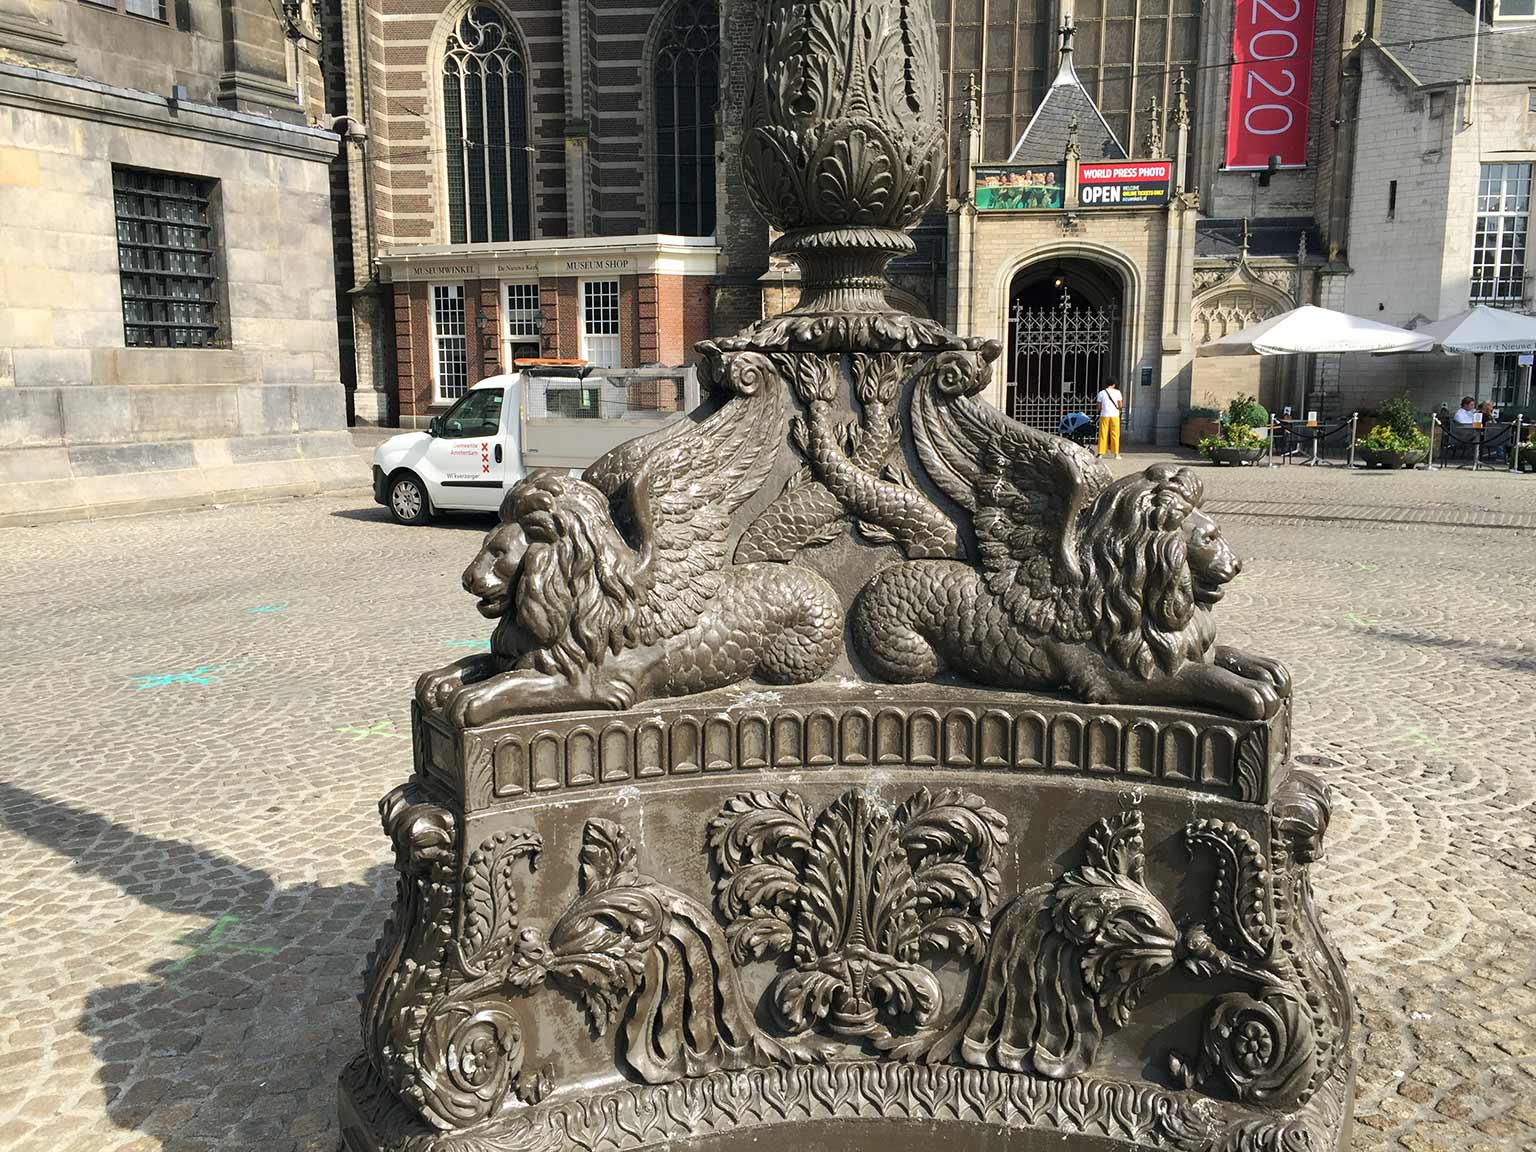 Detail of a lamp posts from 1844 in front of the palace, Dam, Amsterdam